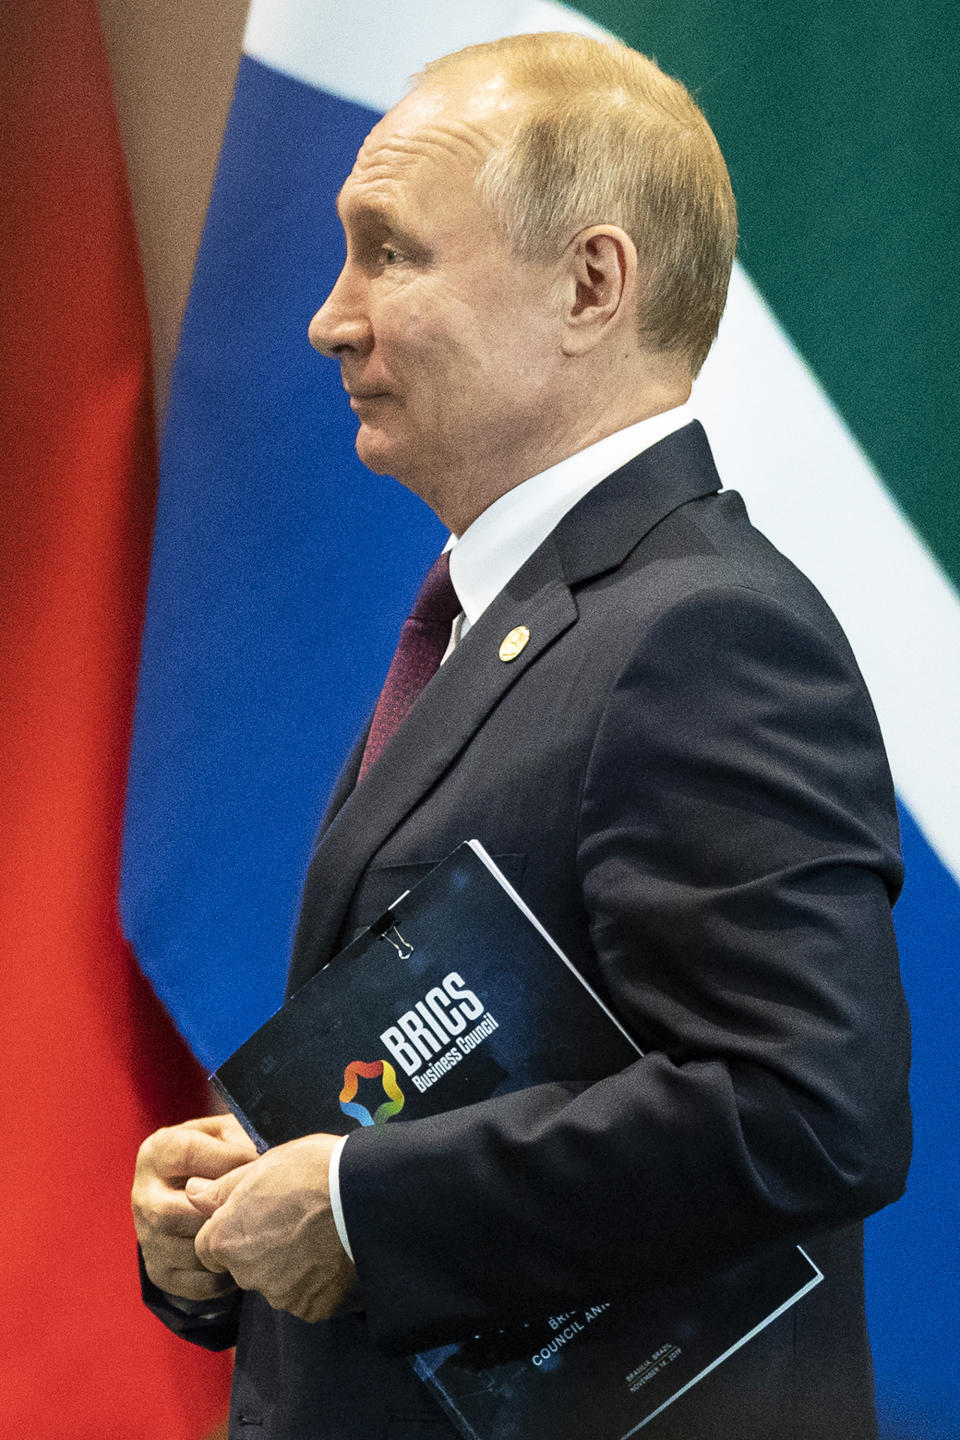 Russia's President Vladimir Putin leaves a meeting with members of the Business Council and management of the New Development Bank during the BRICS emerging economies at the Itamaraty palace in Brasilia, Brazil, Thursday, Nov. 14, 2019. (AP Photo/Pavel Golovkin, Pool)